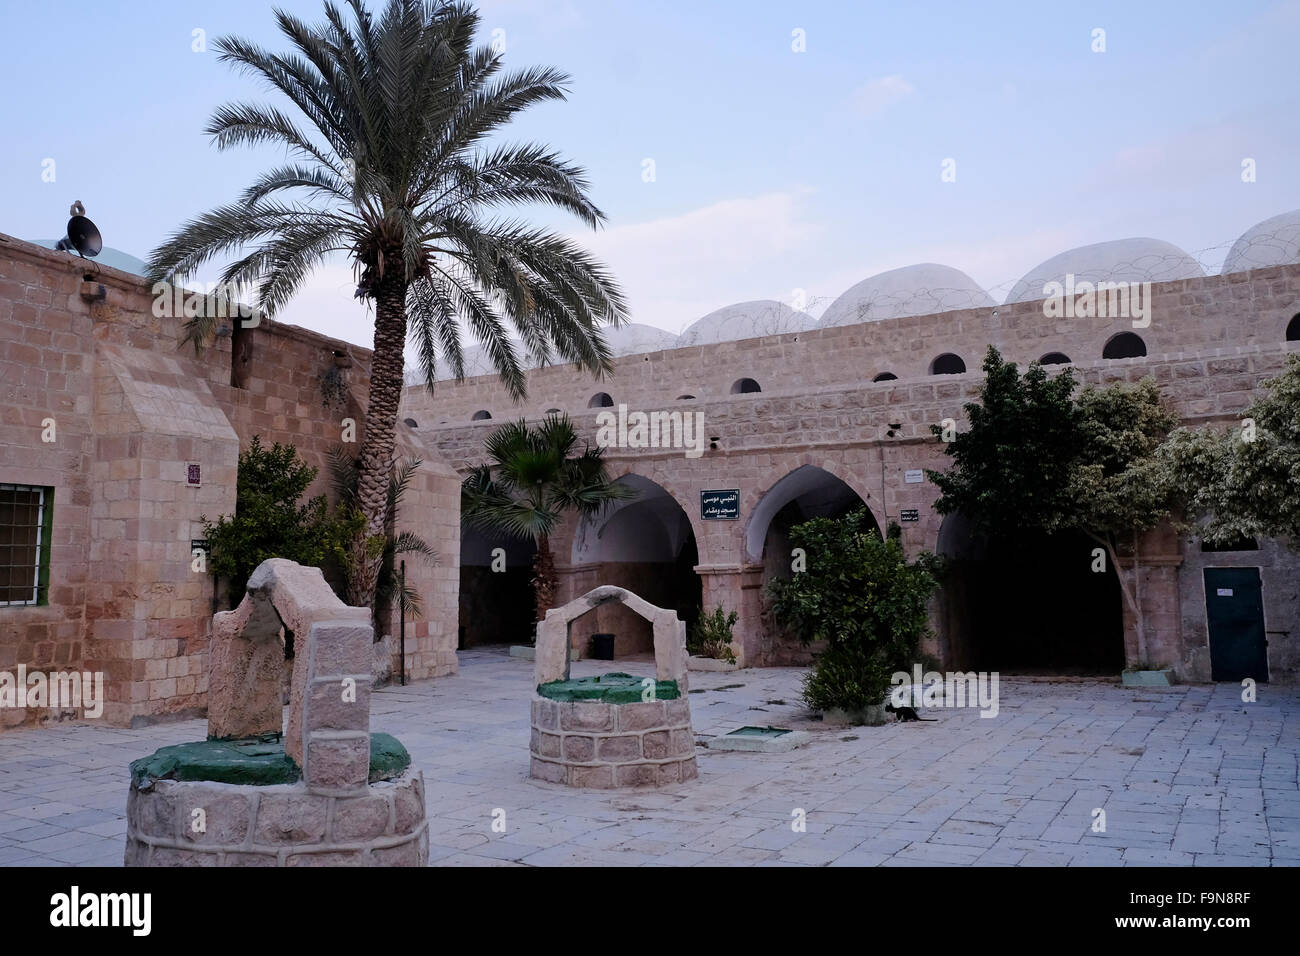 Courtyard of Nabi or Nebi Musa mosque which according to Moslem tradition was the burial place of Moses in Judaean or Judean desert West Bank Israel Stock Photo